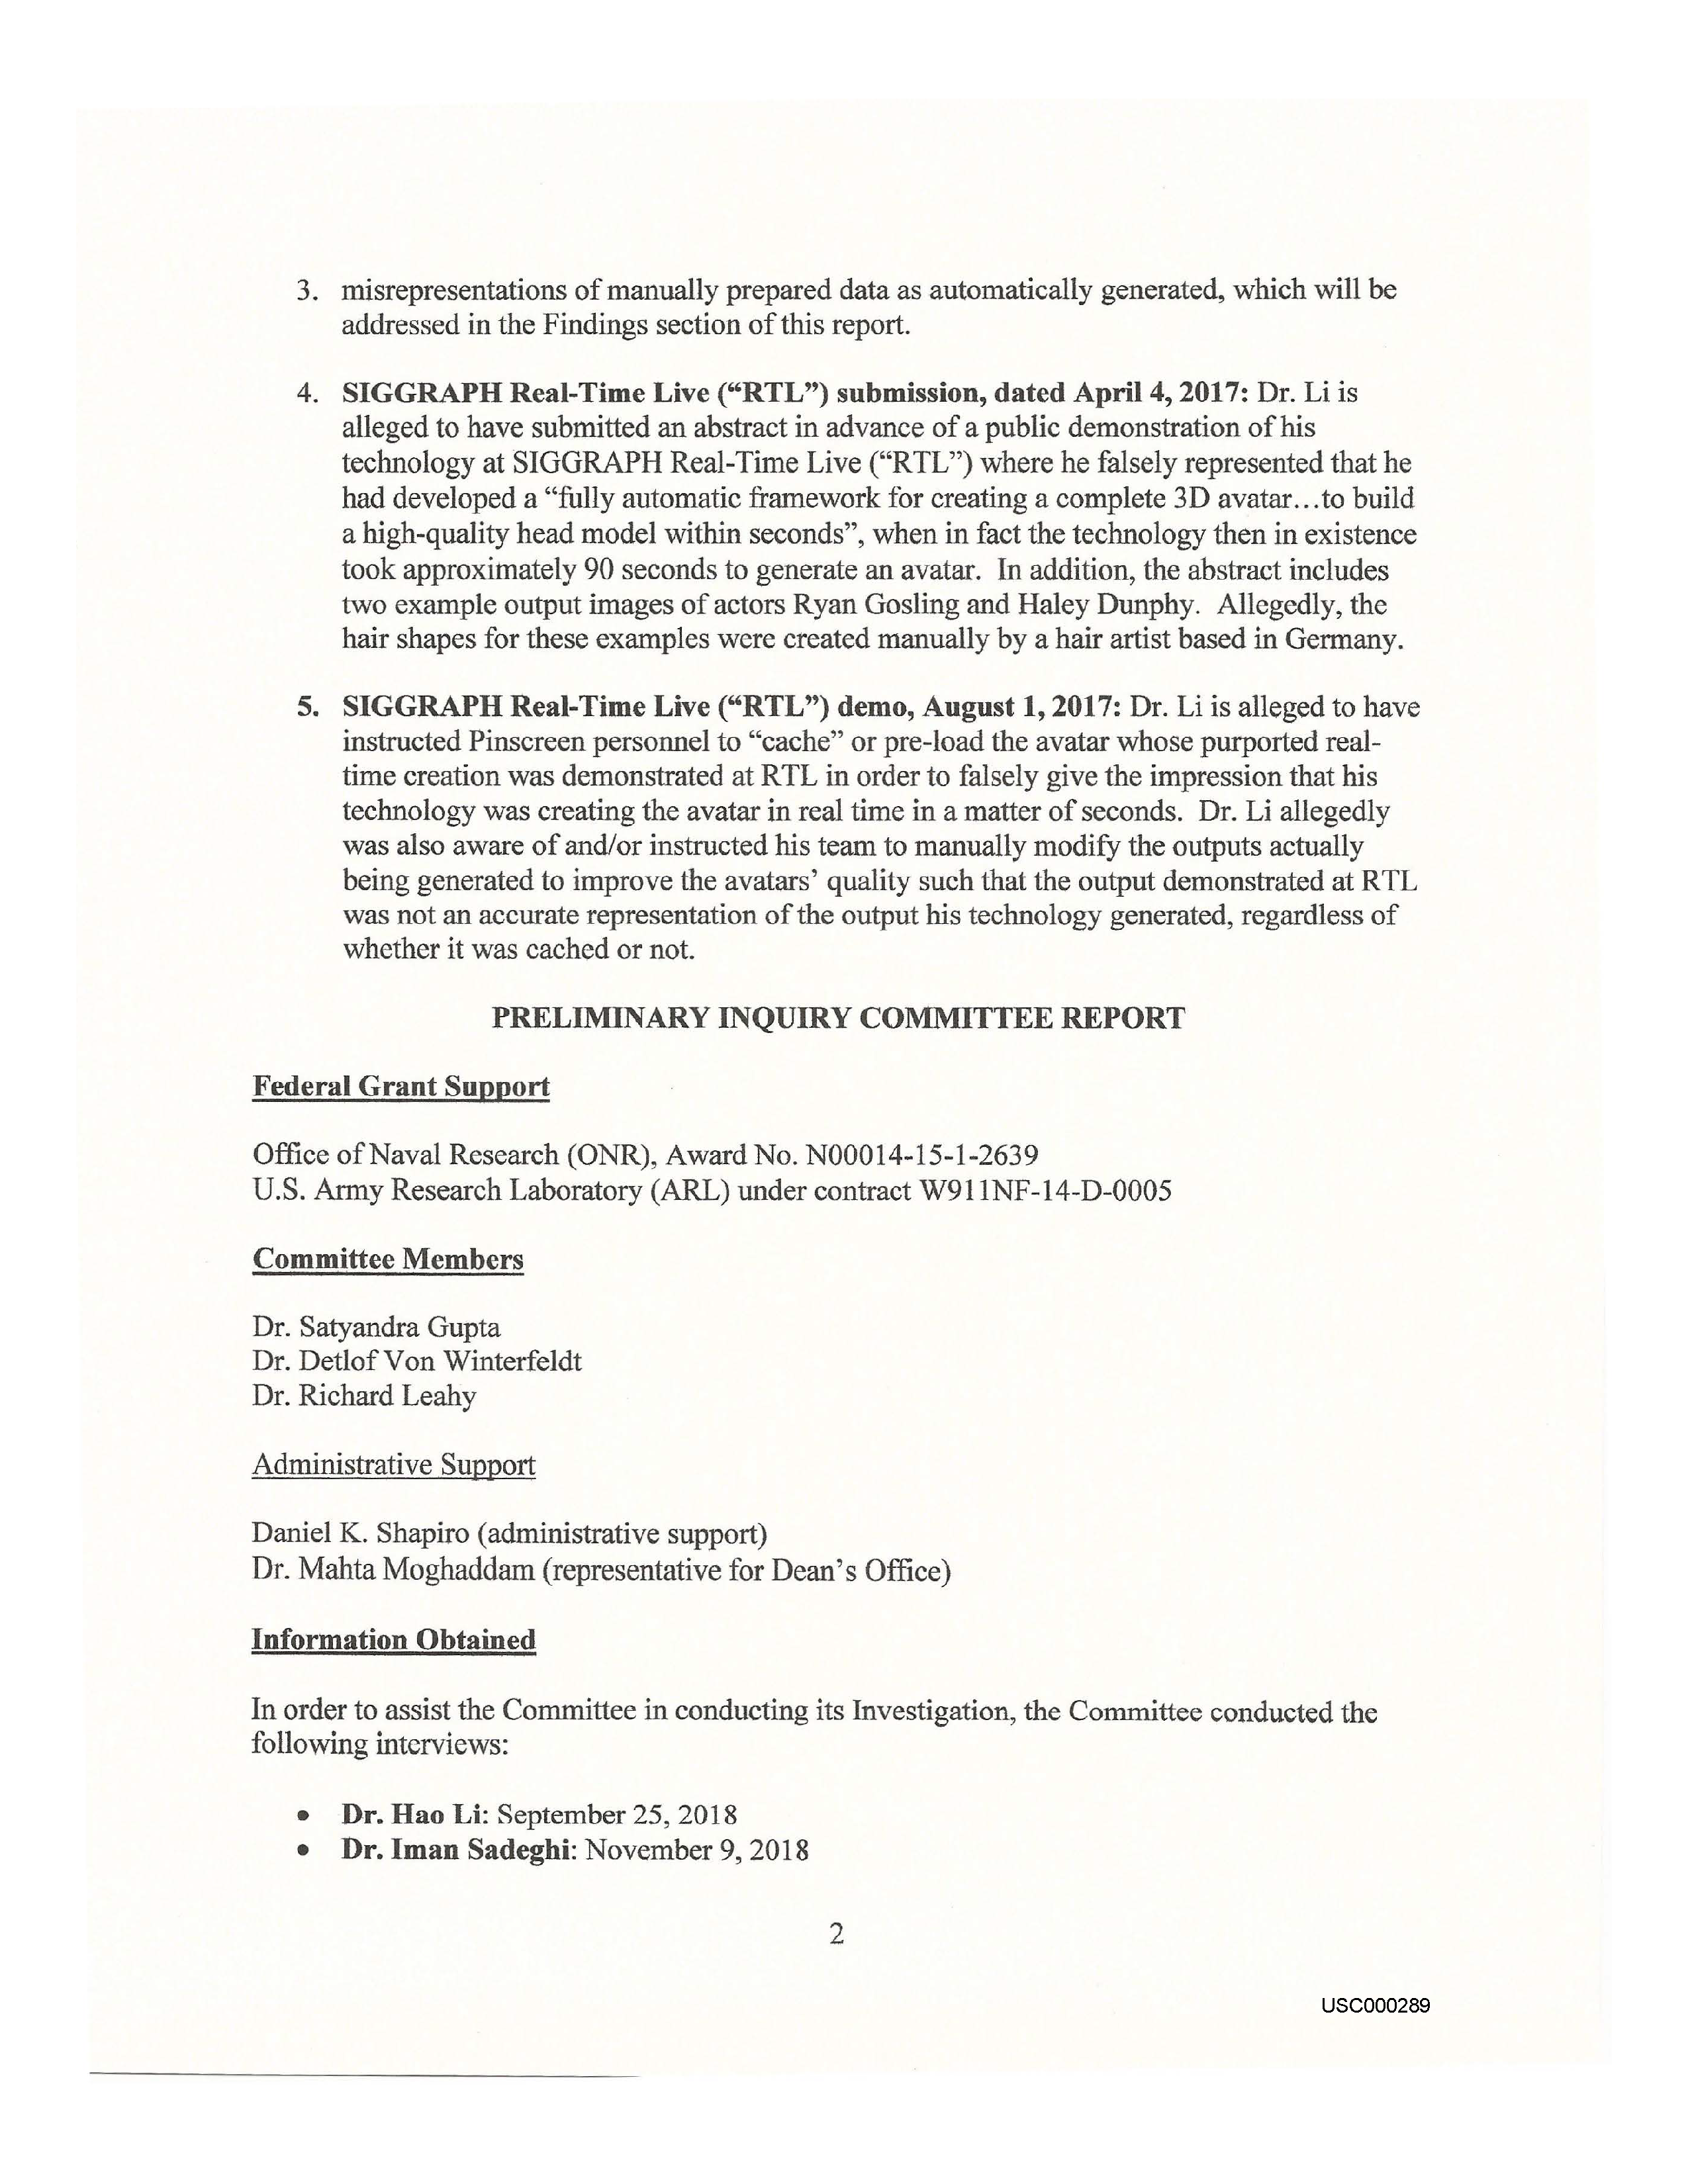 USC's Investigation Report re Hao Li's and Pinscreen's Scientific Misconduct at ACM SIGGRAPH RTL 2017 - Full Report Page 291